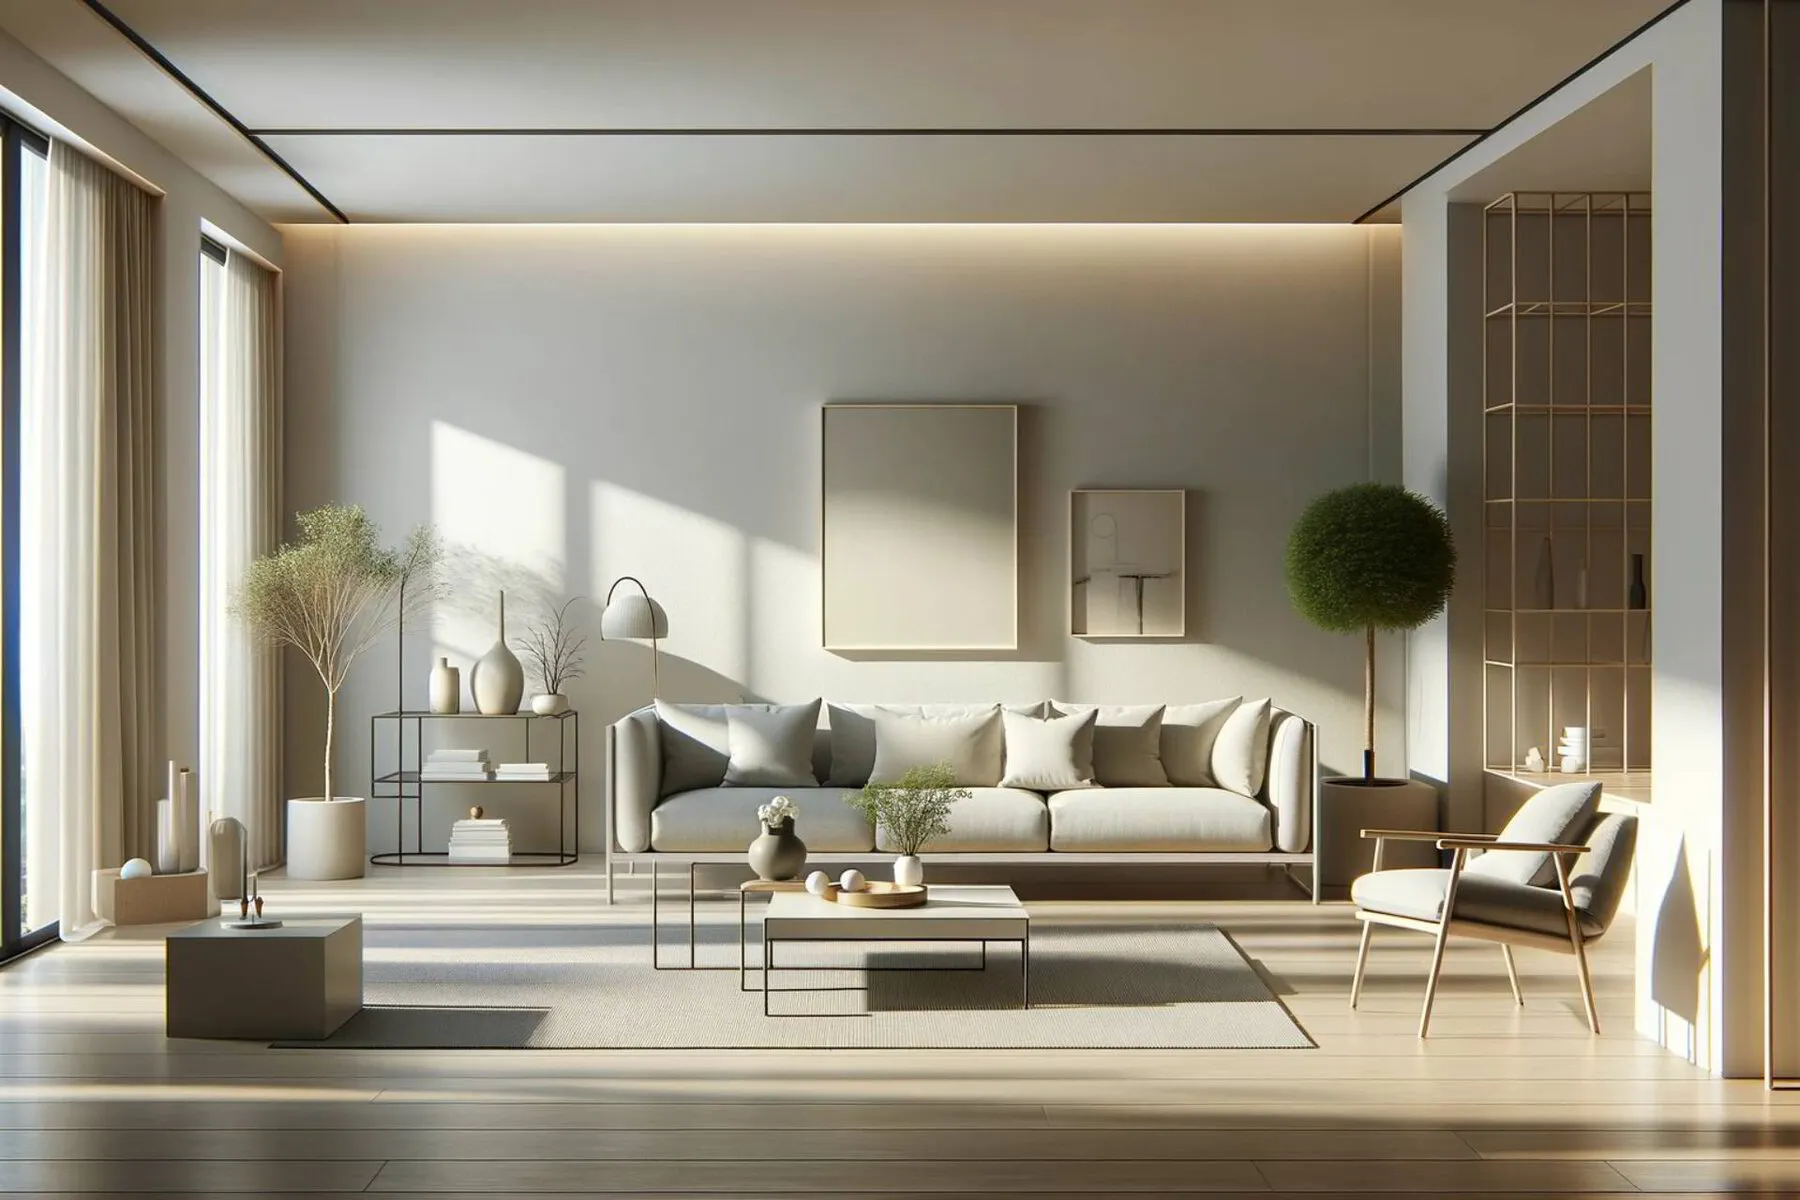 minimalist, well-organized living room reflecting tranquility and functionality